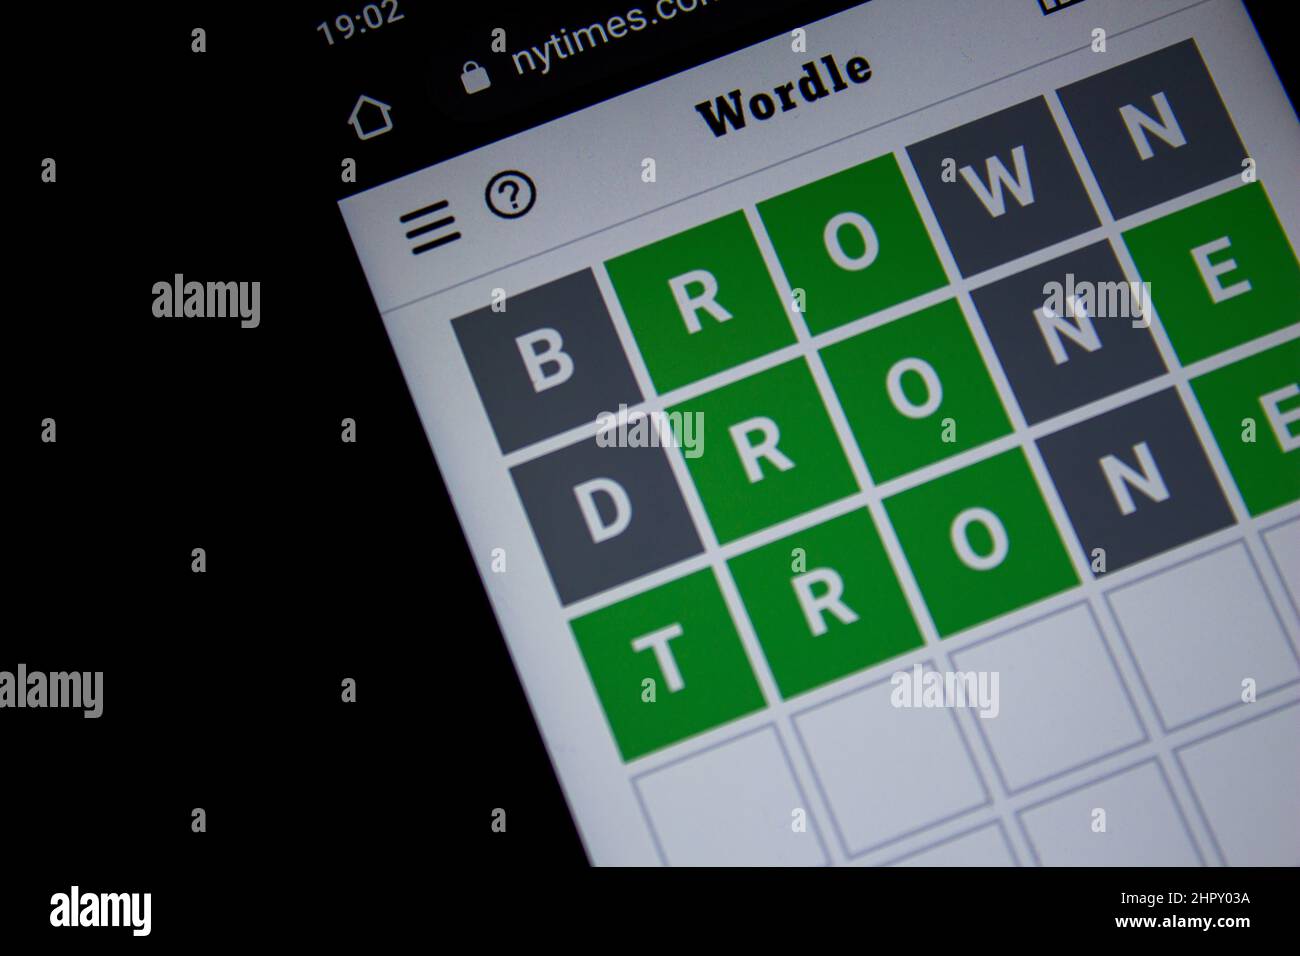 From Foodle to Framed: Wordle has some game competition now